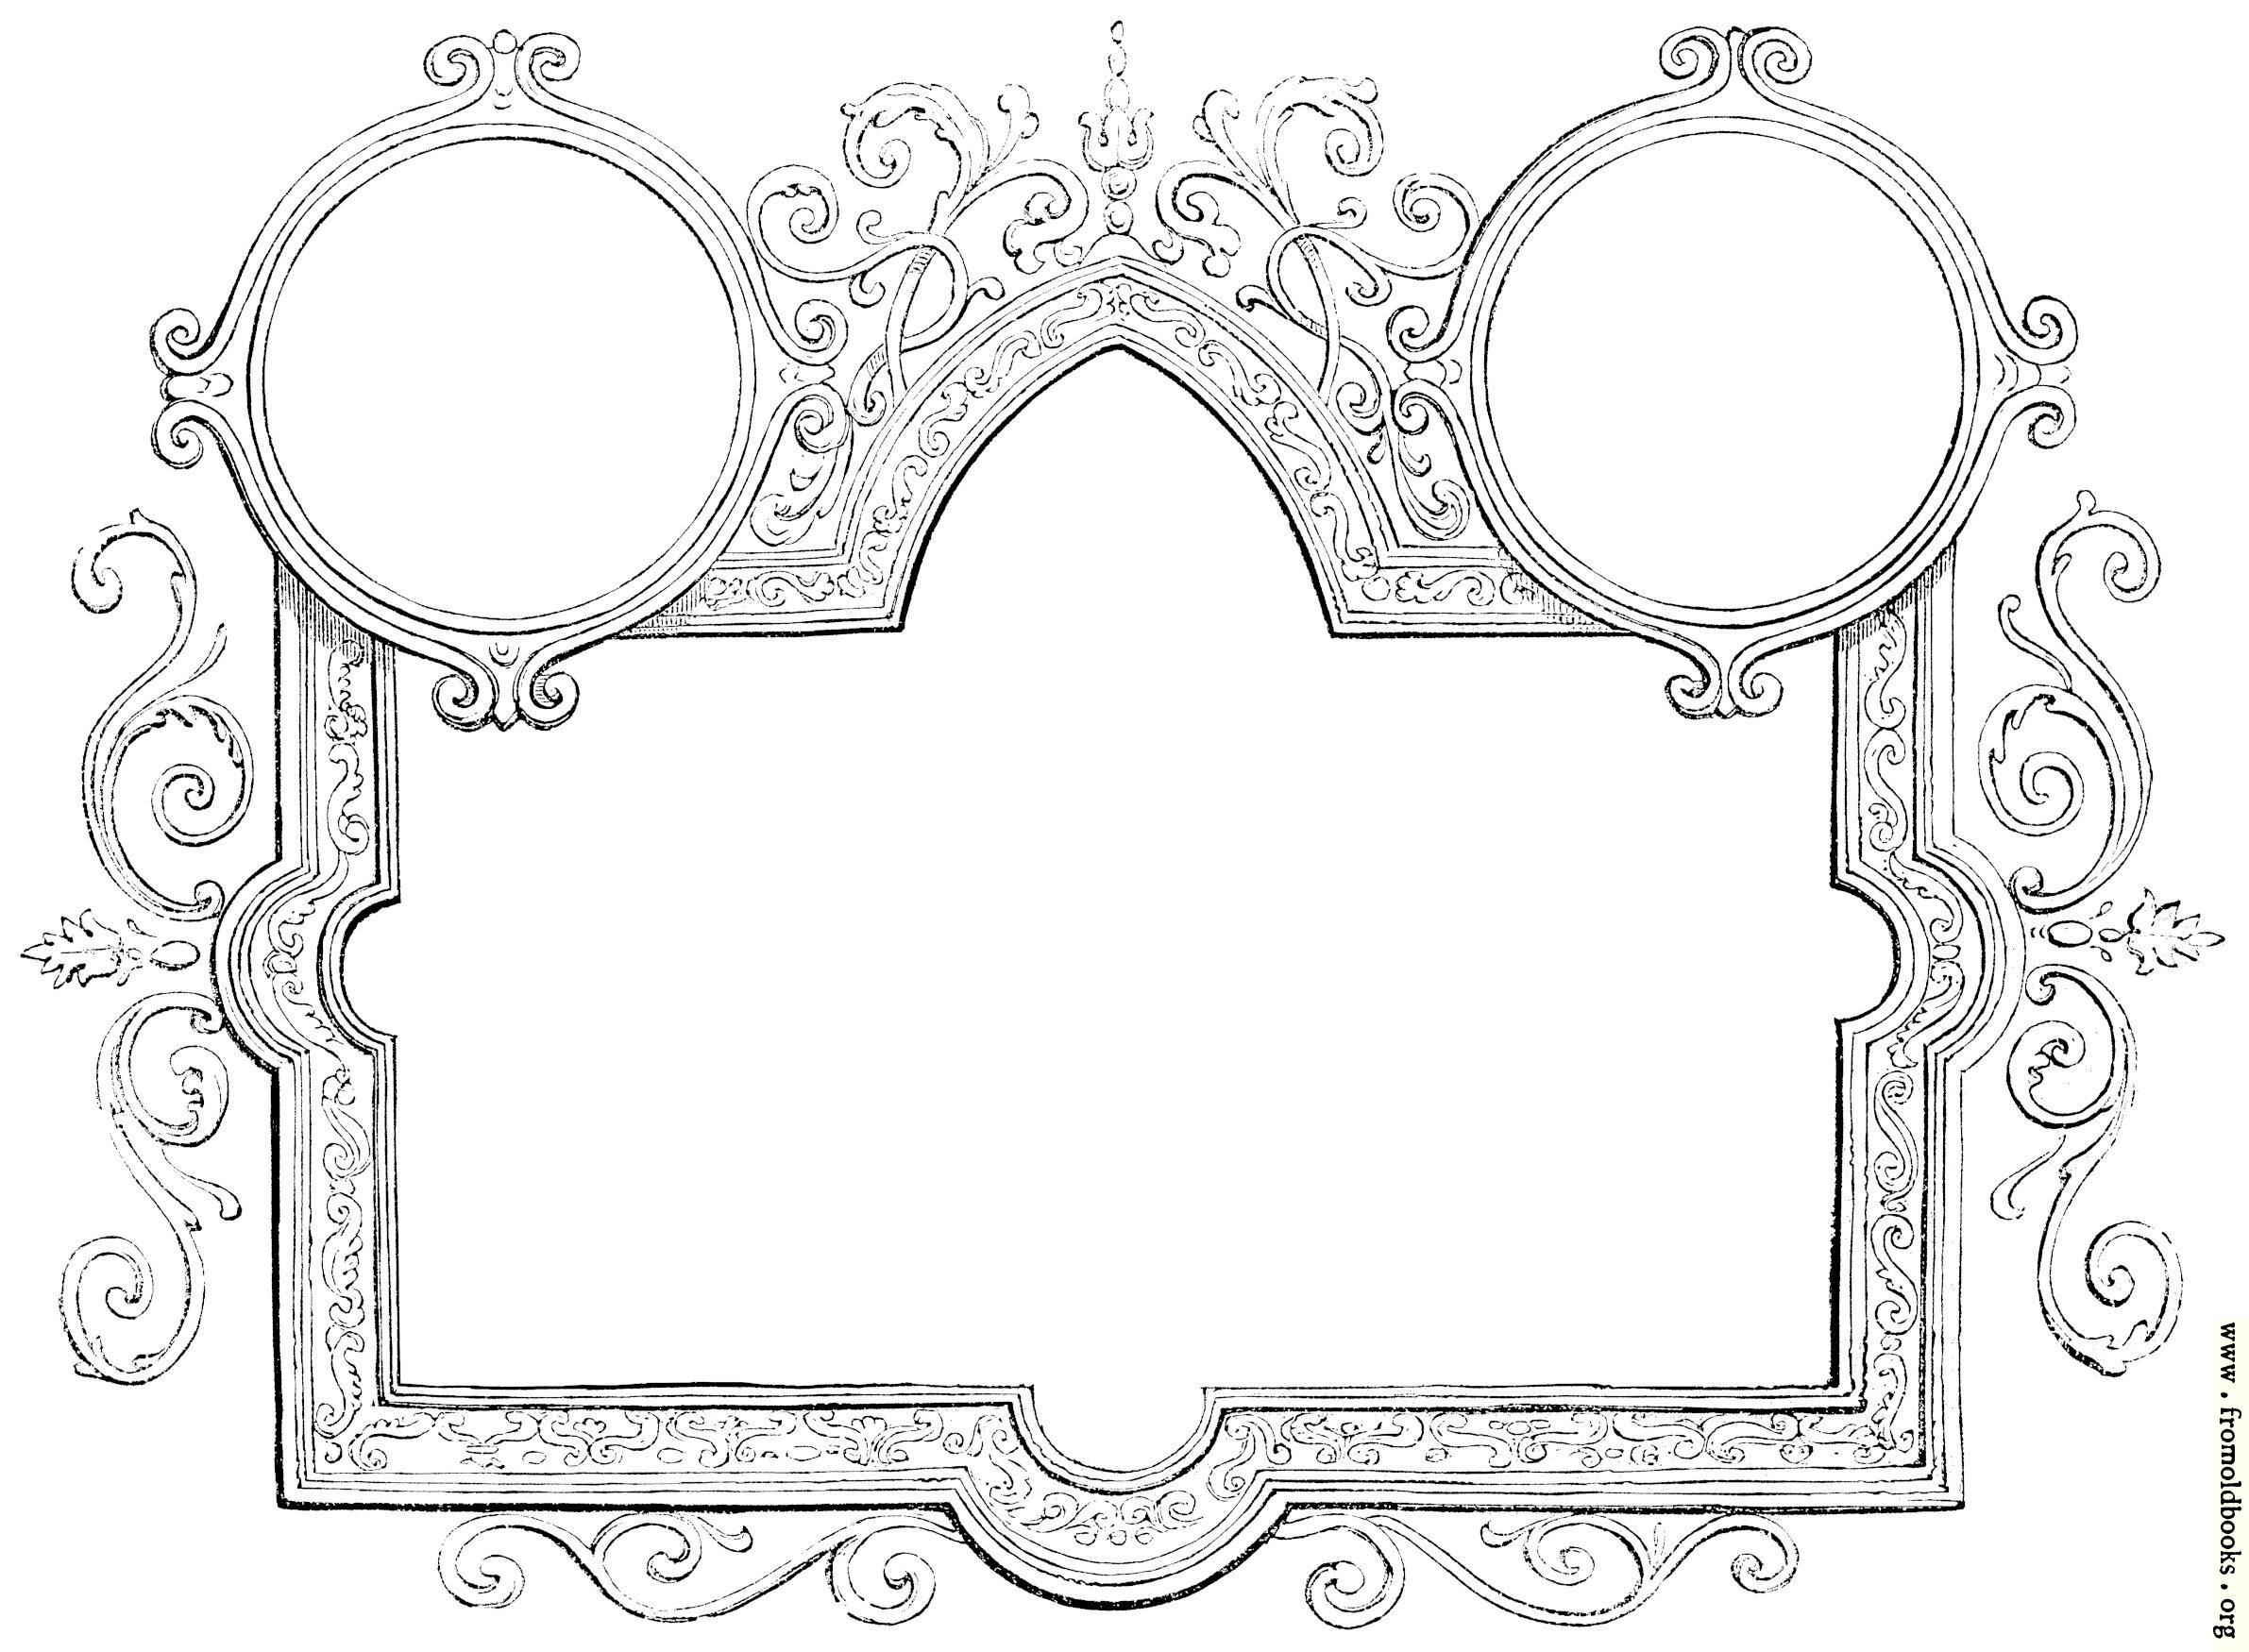 [Picture: Ornate Early Victorian Border]